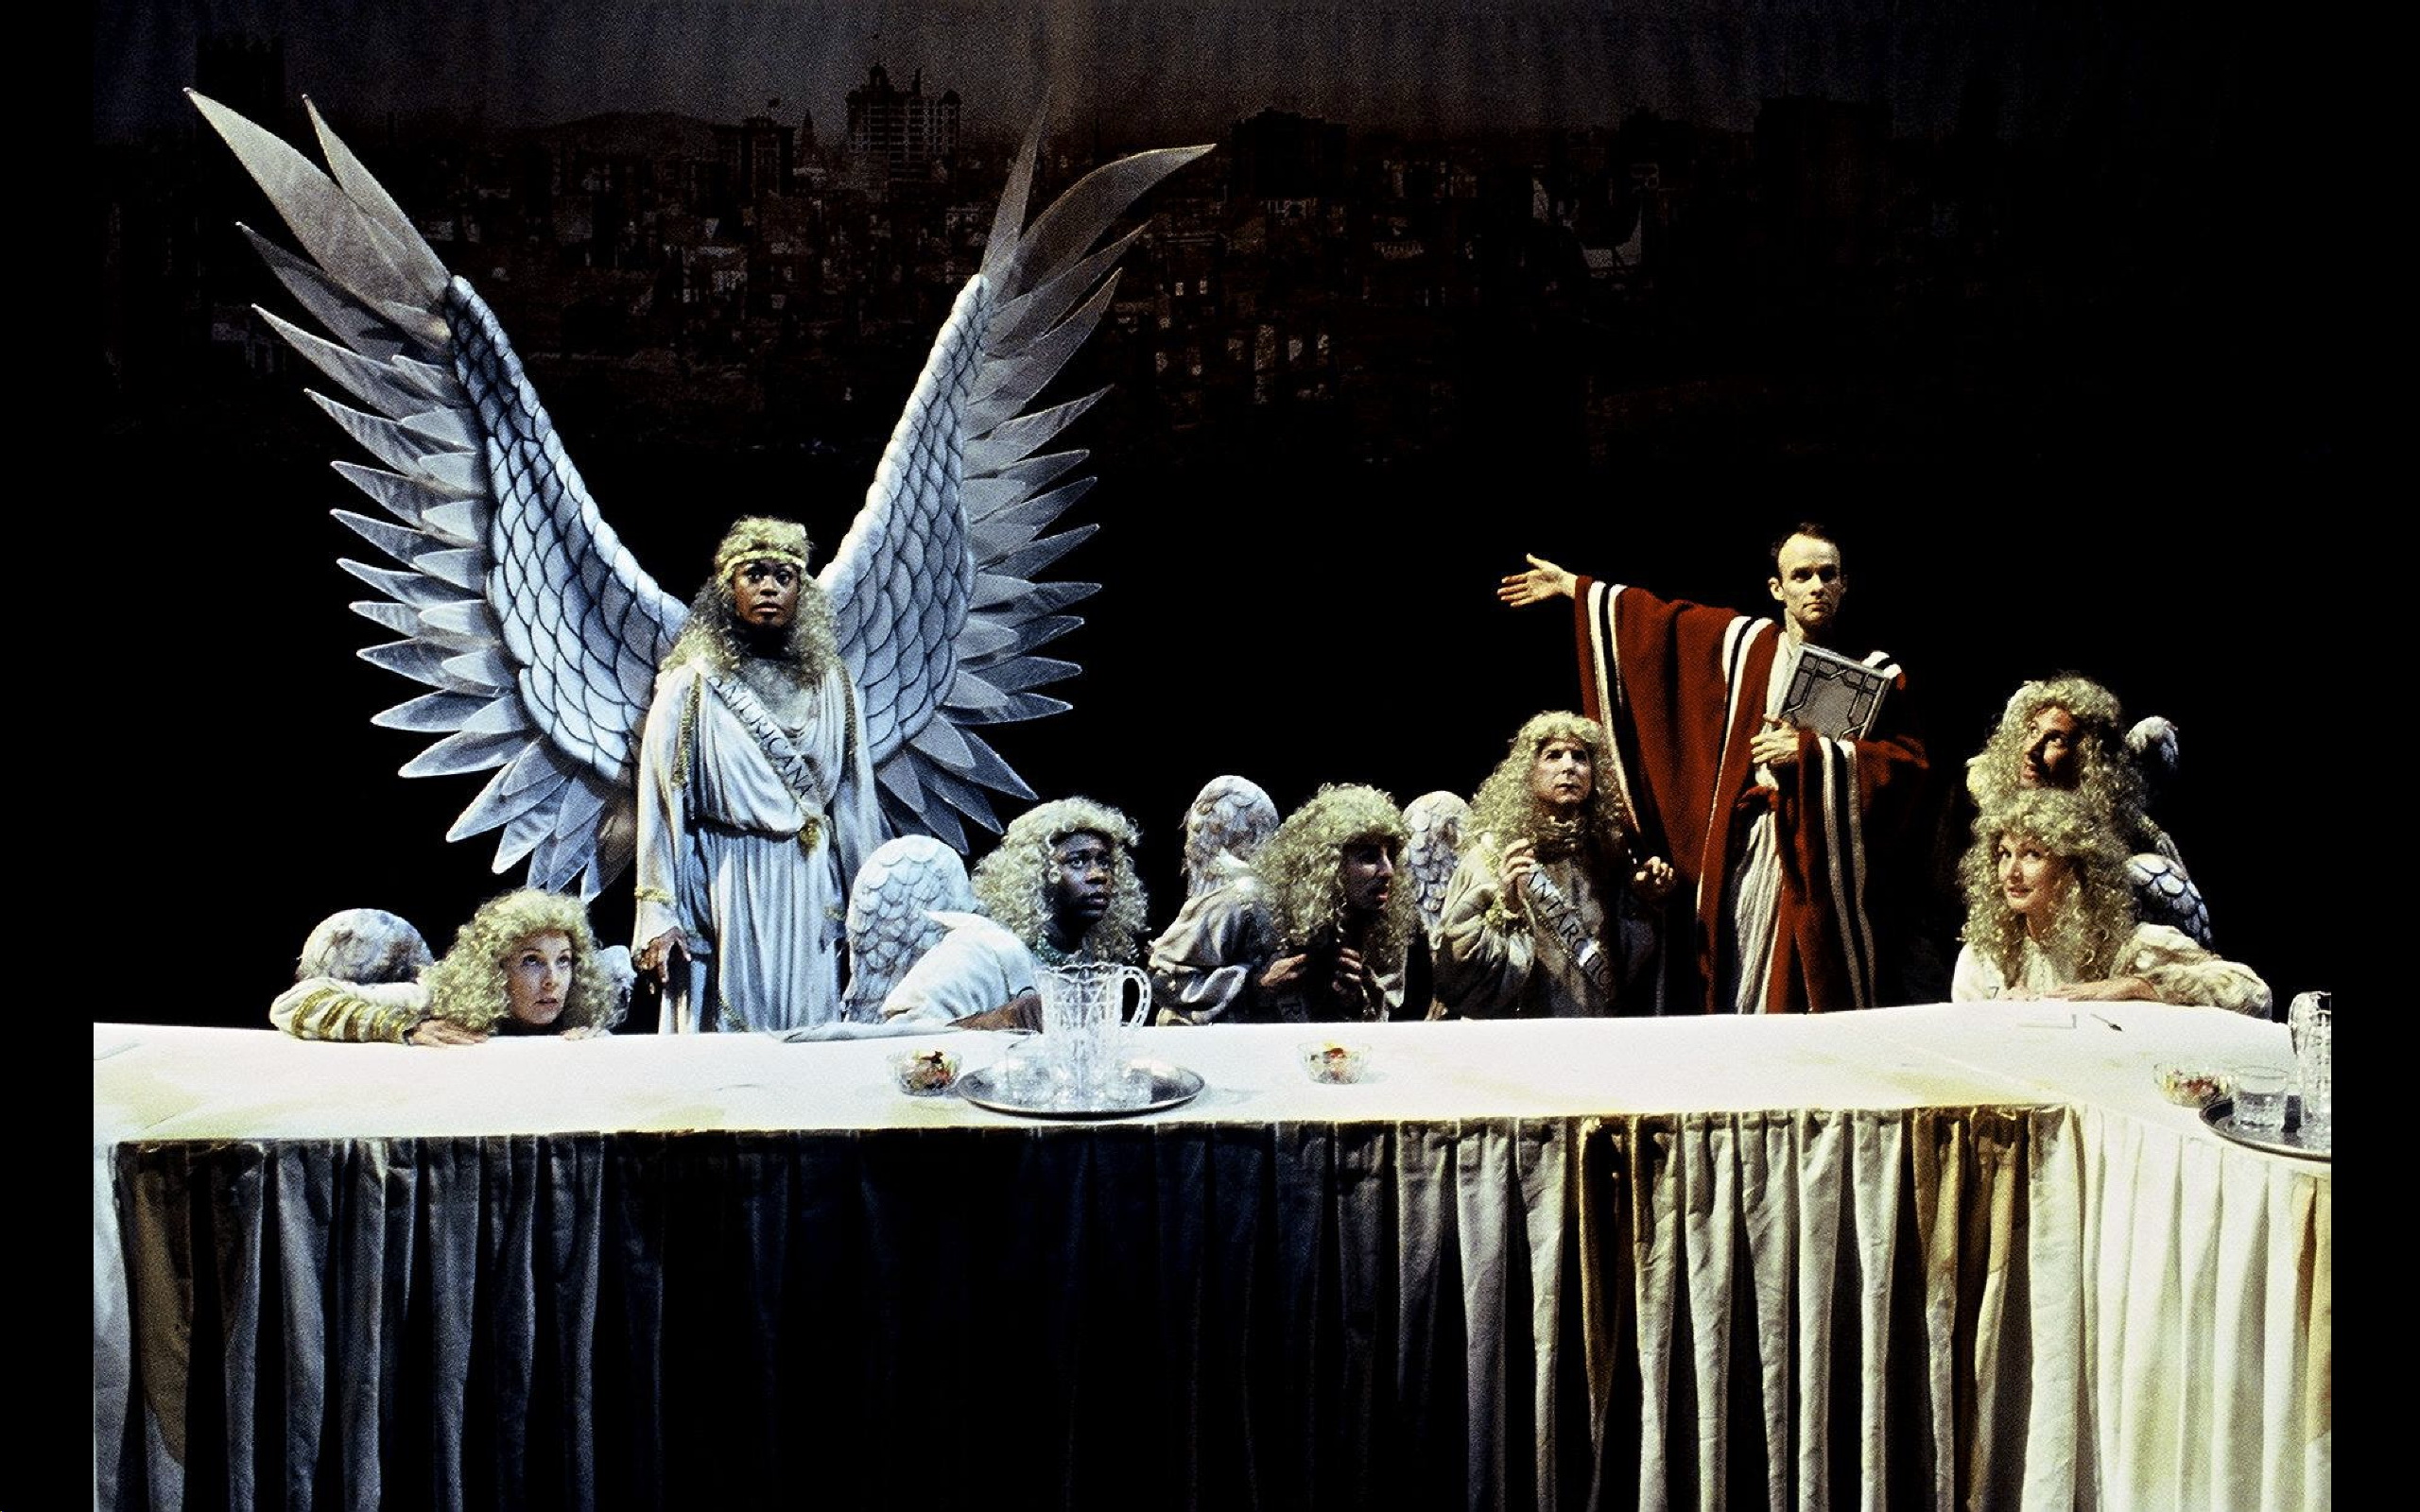 Actors Theatre. 2002. Angels in America - Millennium Approaches and Perestroika. Cathy Dresbach, Lillie Richardson, Alvin Keith, Christopher Williams, Jon Gentry, Oliver Wadsworth, Natalie Inglish Nesbitt and Rusty Ferracane. 